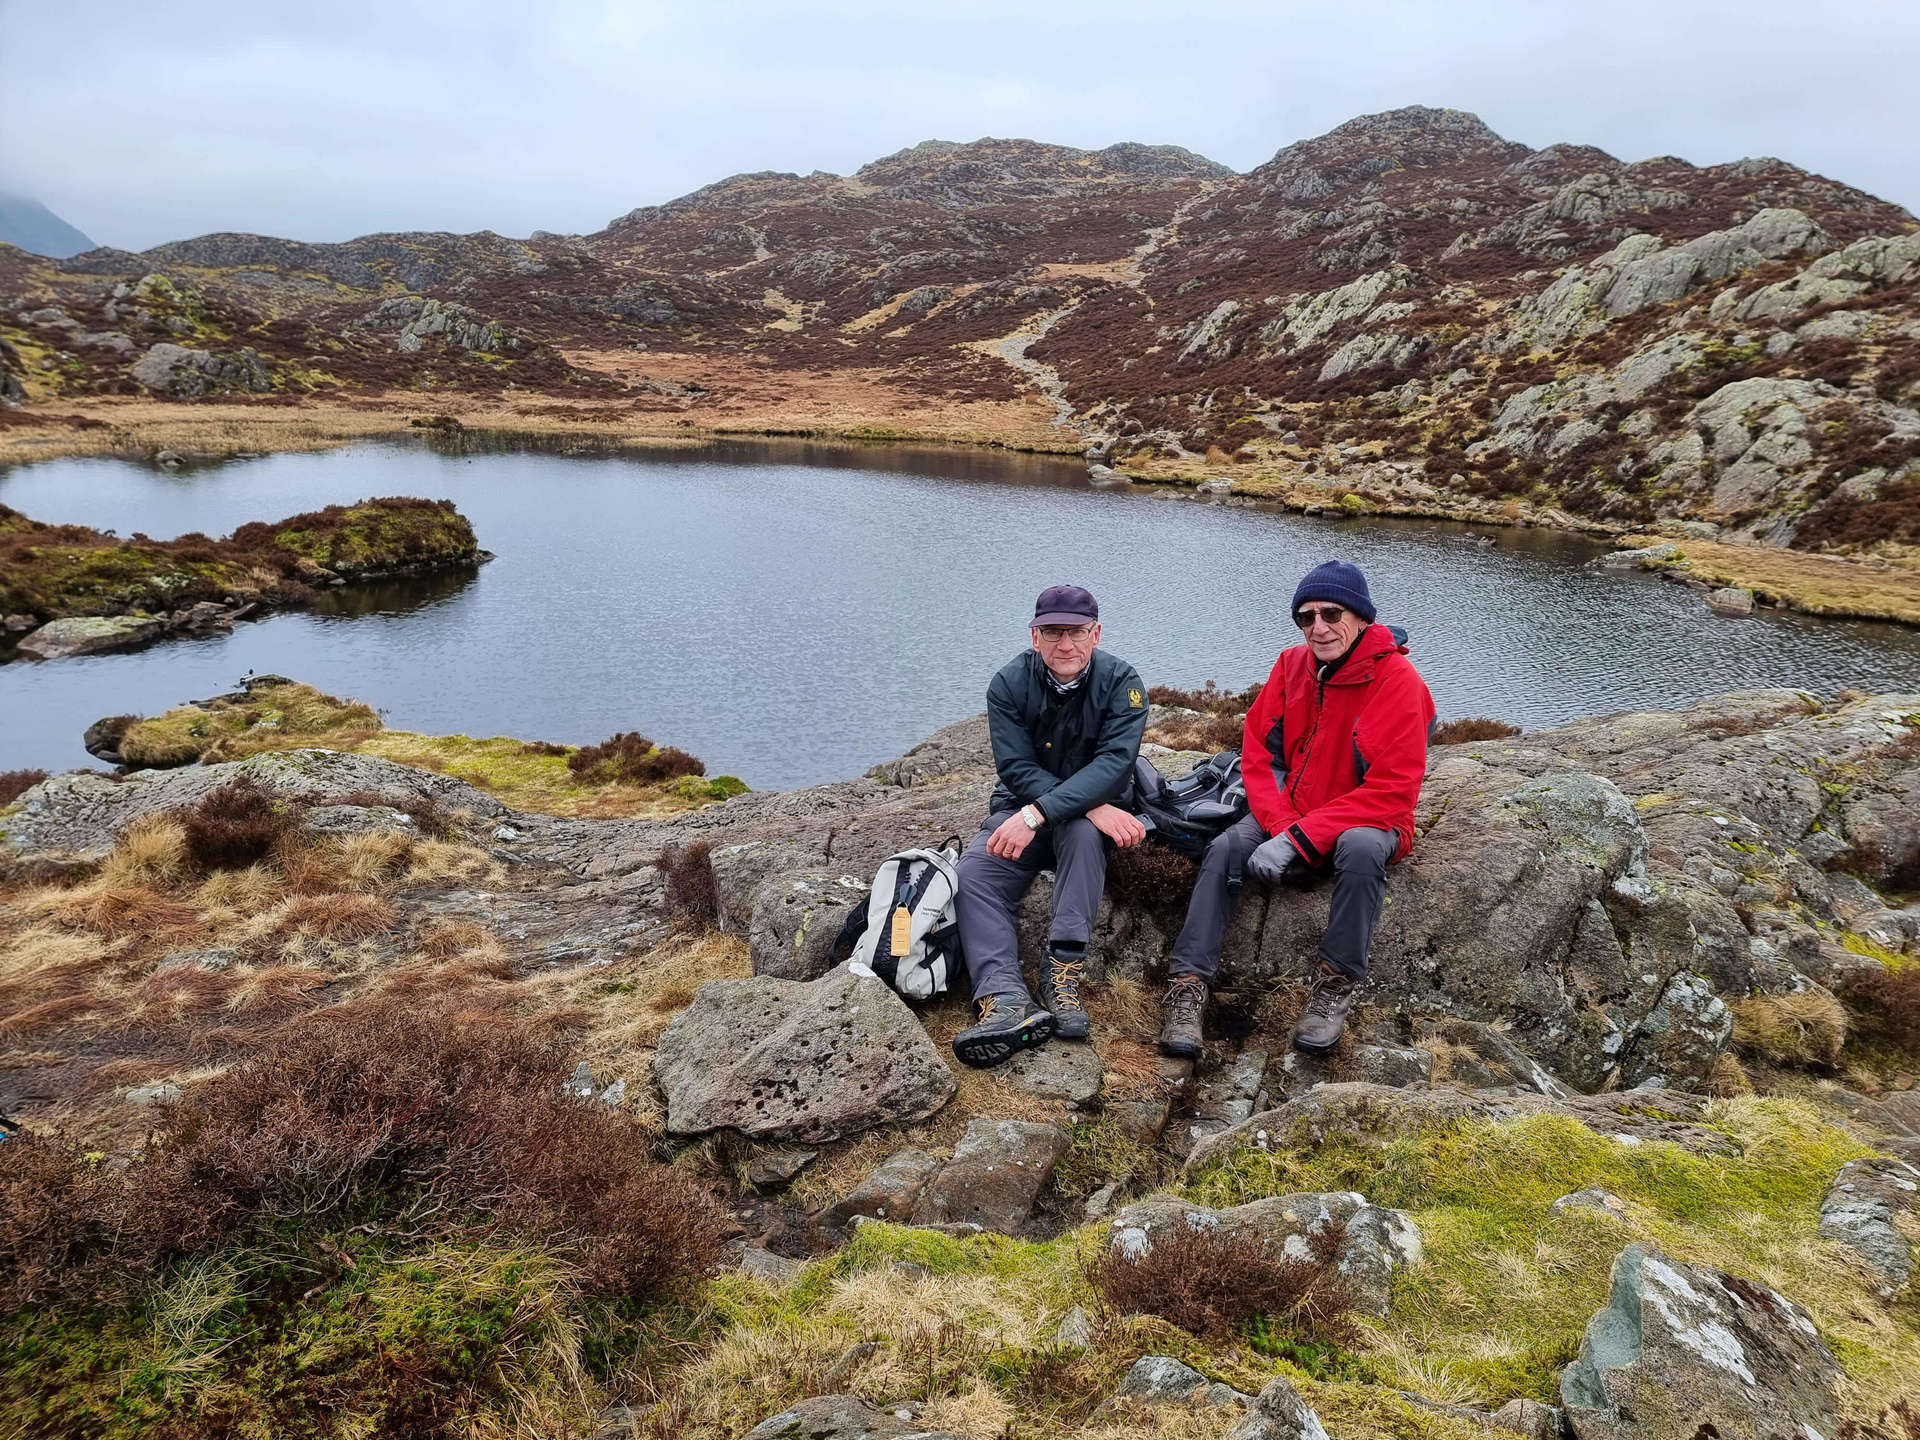 Mike and Paul relaxing by the Tarn